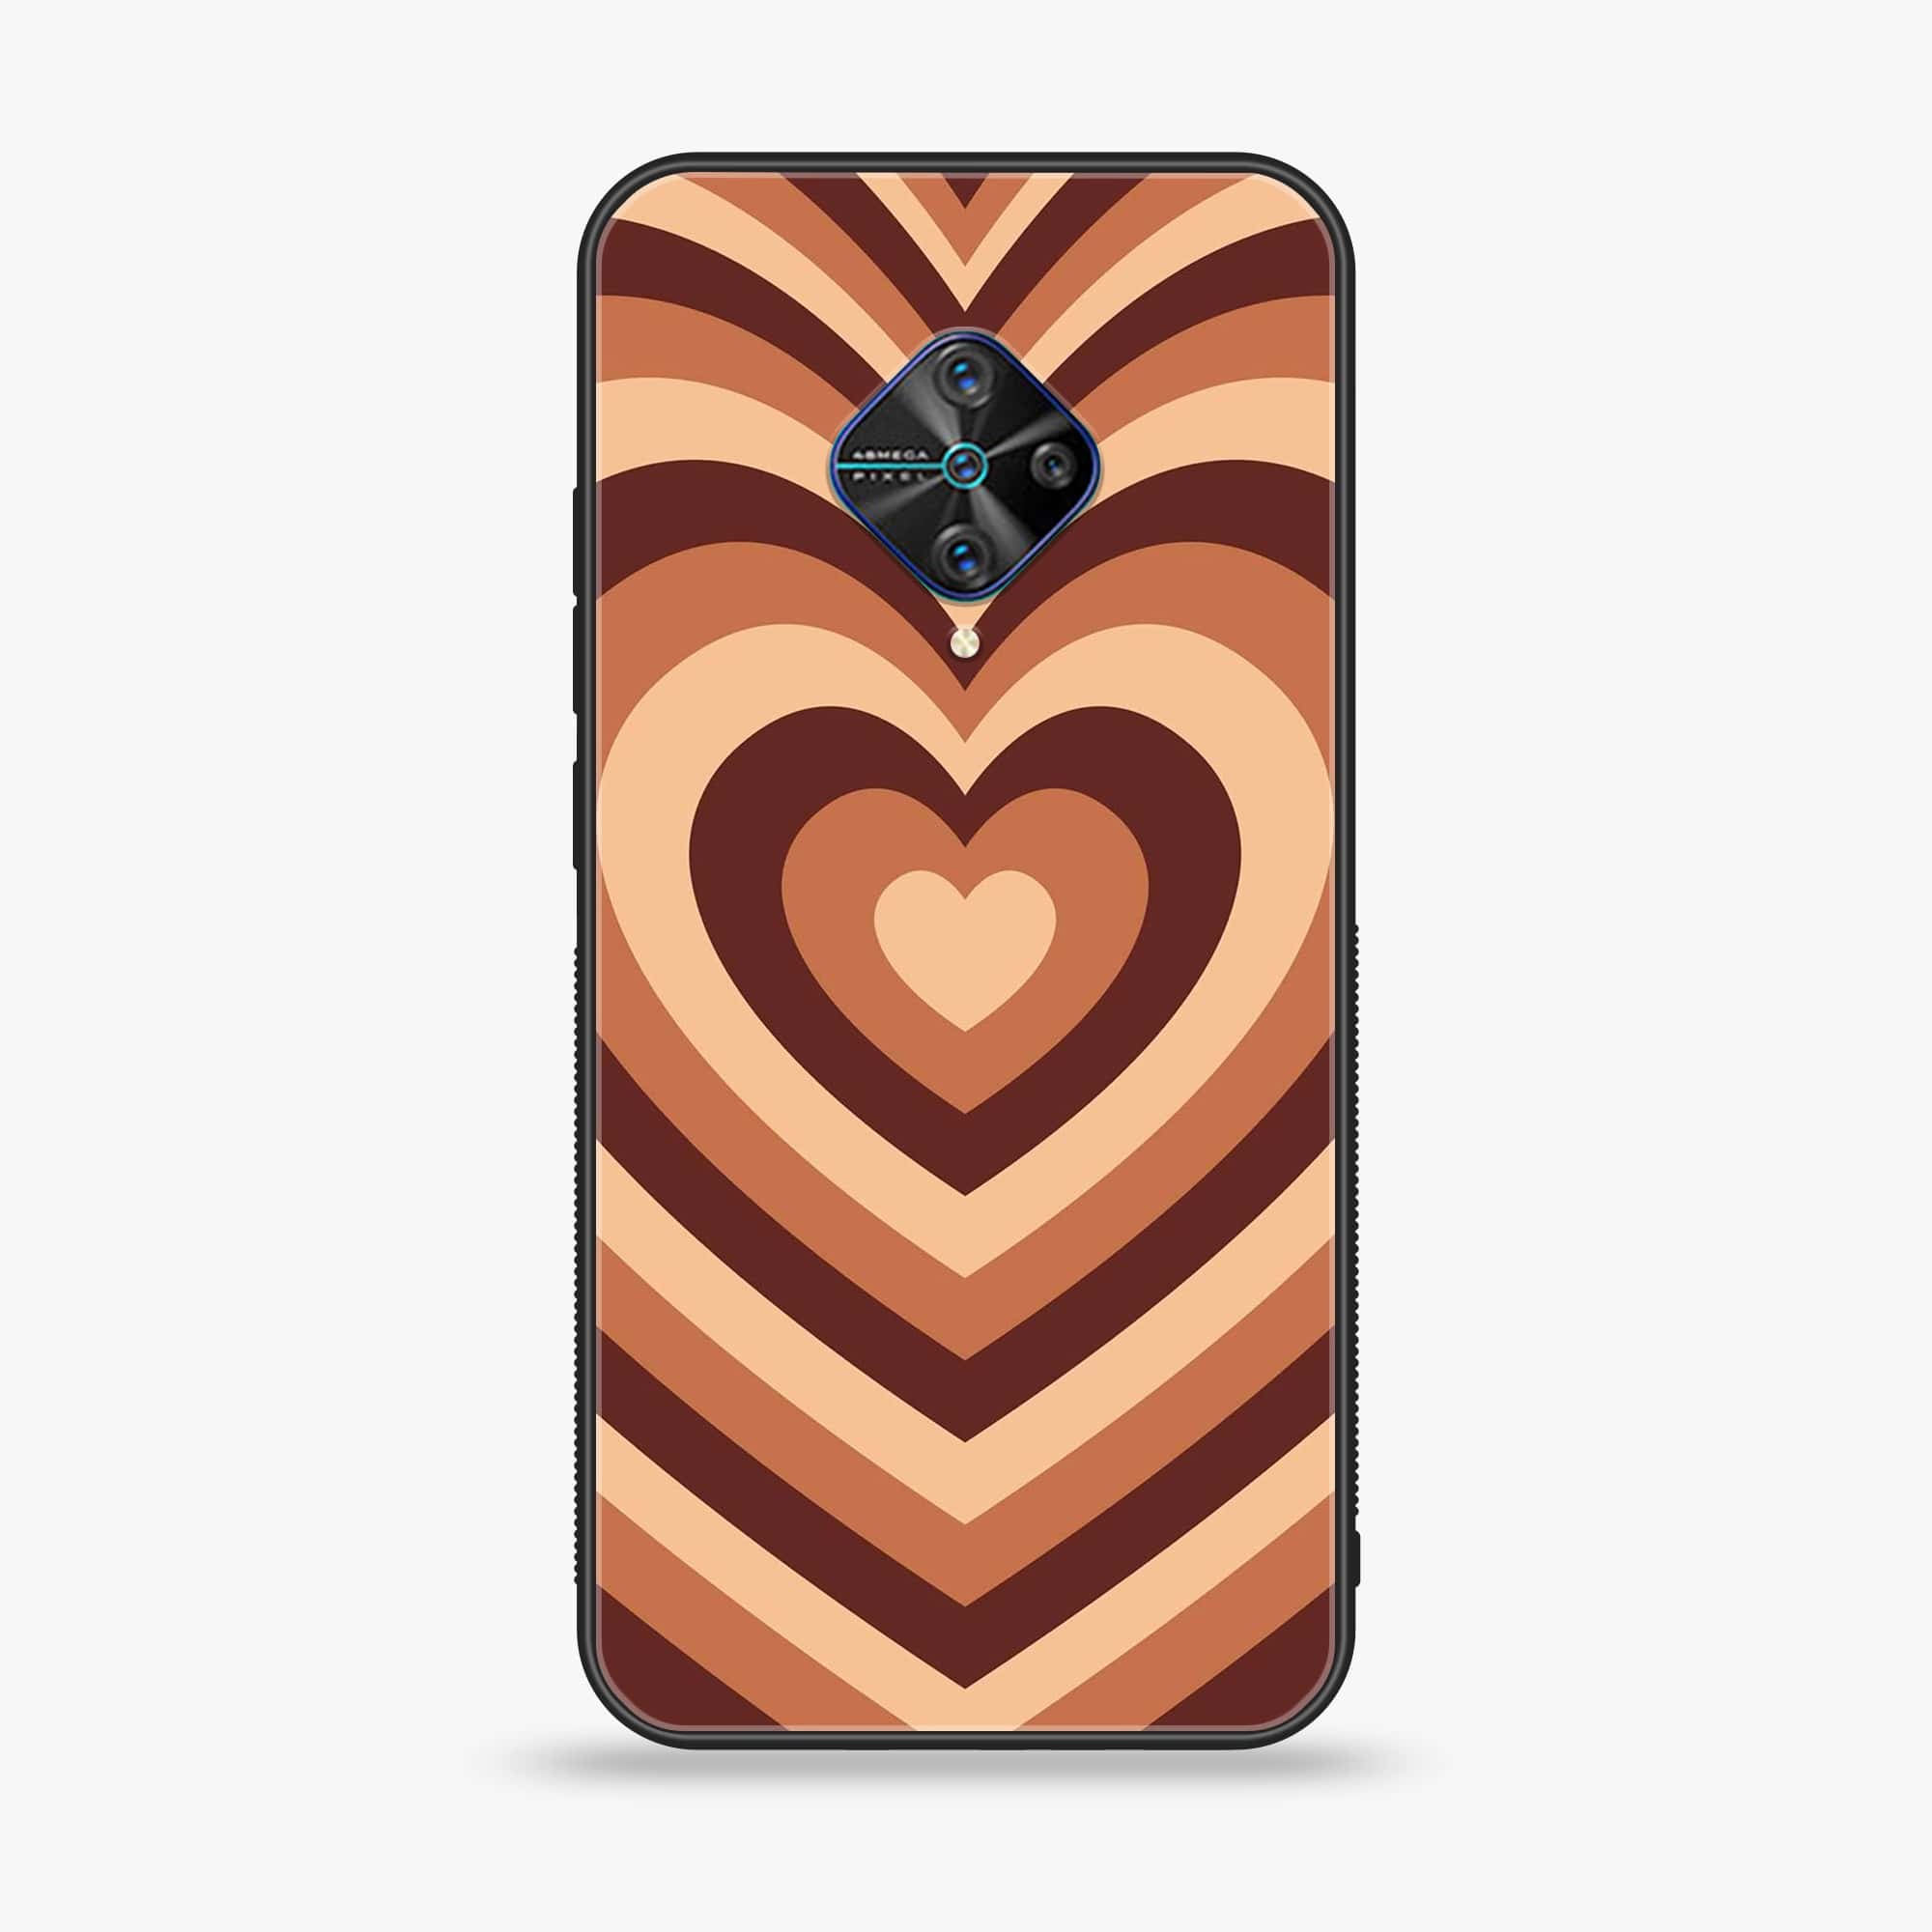 Vivo Y51 (Camera in middle) - Heart Beat Series - Premium Printed Glass soft Bumper shock Proof Case